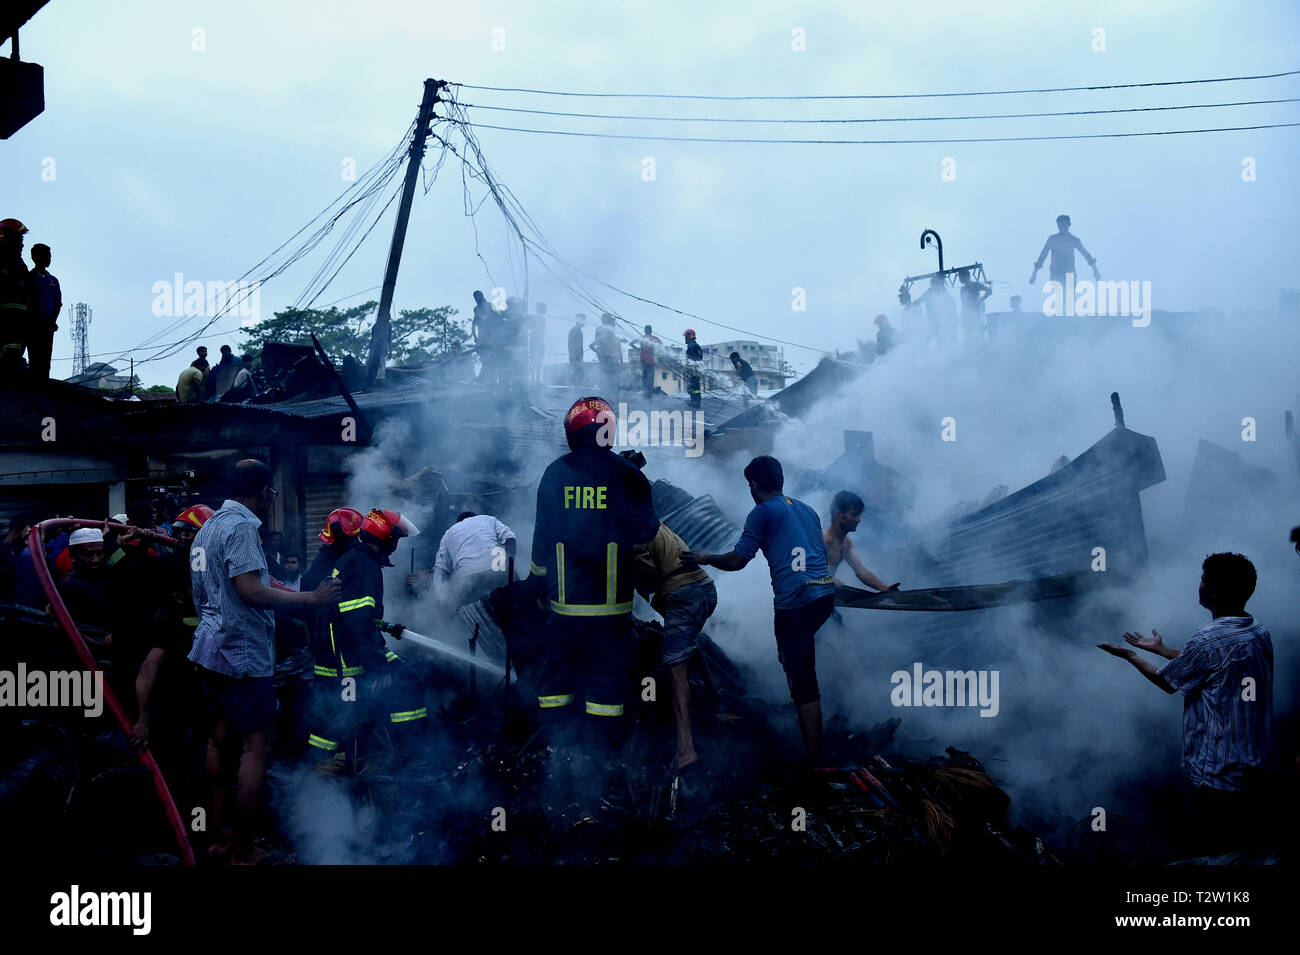 Beijing, Bangladesh. 4th Apr, 2019. Smoke billows after a fire broke out at a kitchen market in Dhaka, Bangladesh, April 4, 2019. An early morning fire gutted dozens of shops in a kitchen market in Bangladesh capital Dhaka on Thursday, Kazi Nazmuzzaman, deputy assistant director of Fire Service and Civil Defense, told Xinhua. Credit: Stringer/Xinhua/Alamy Live News Stock Photo